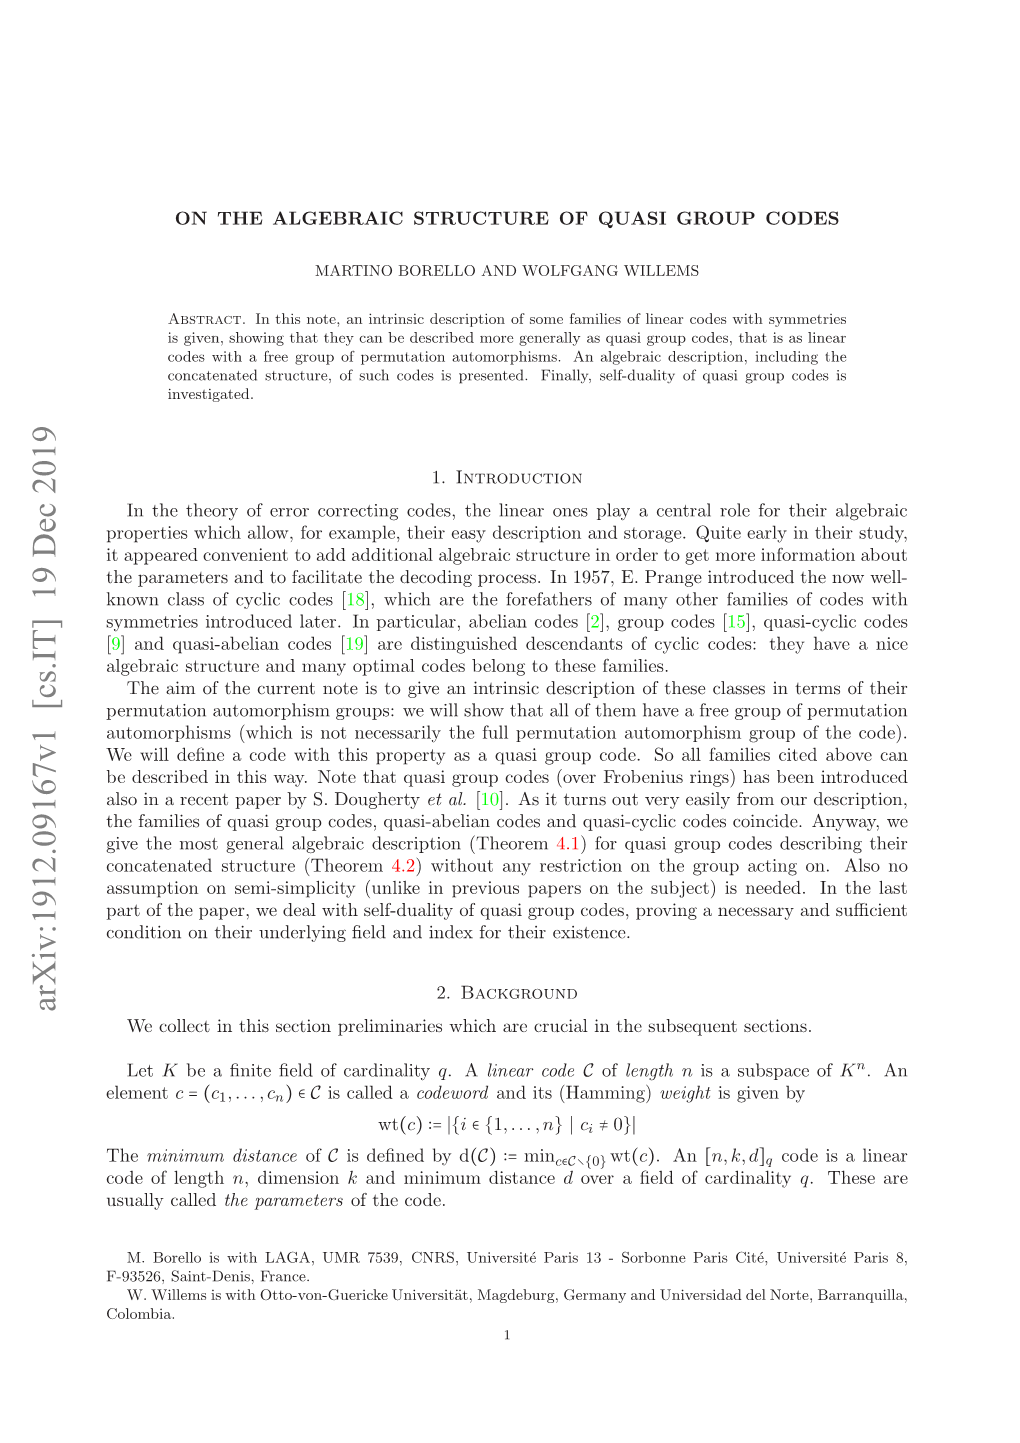 On the Algebraic Structure of Quasi Group Codes